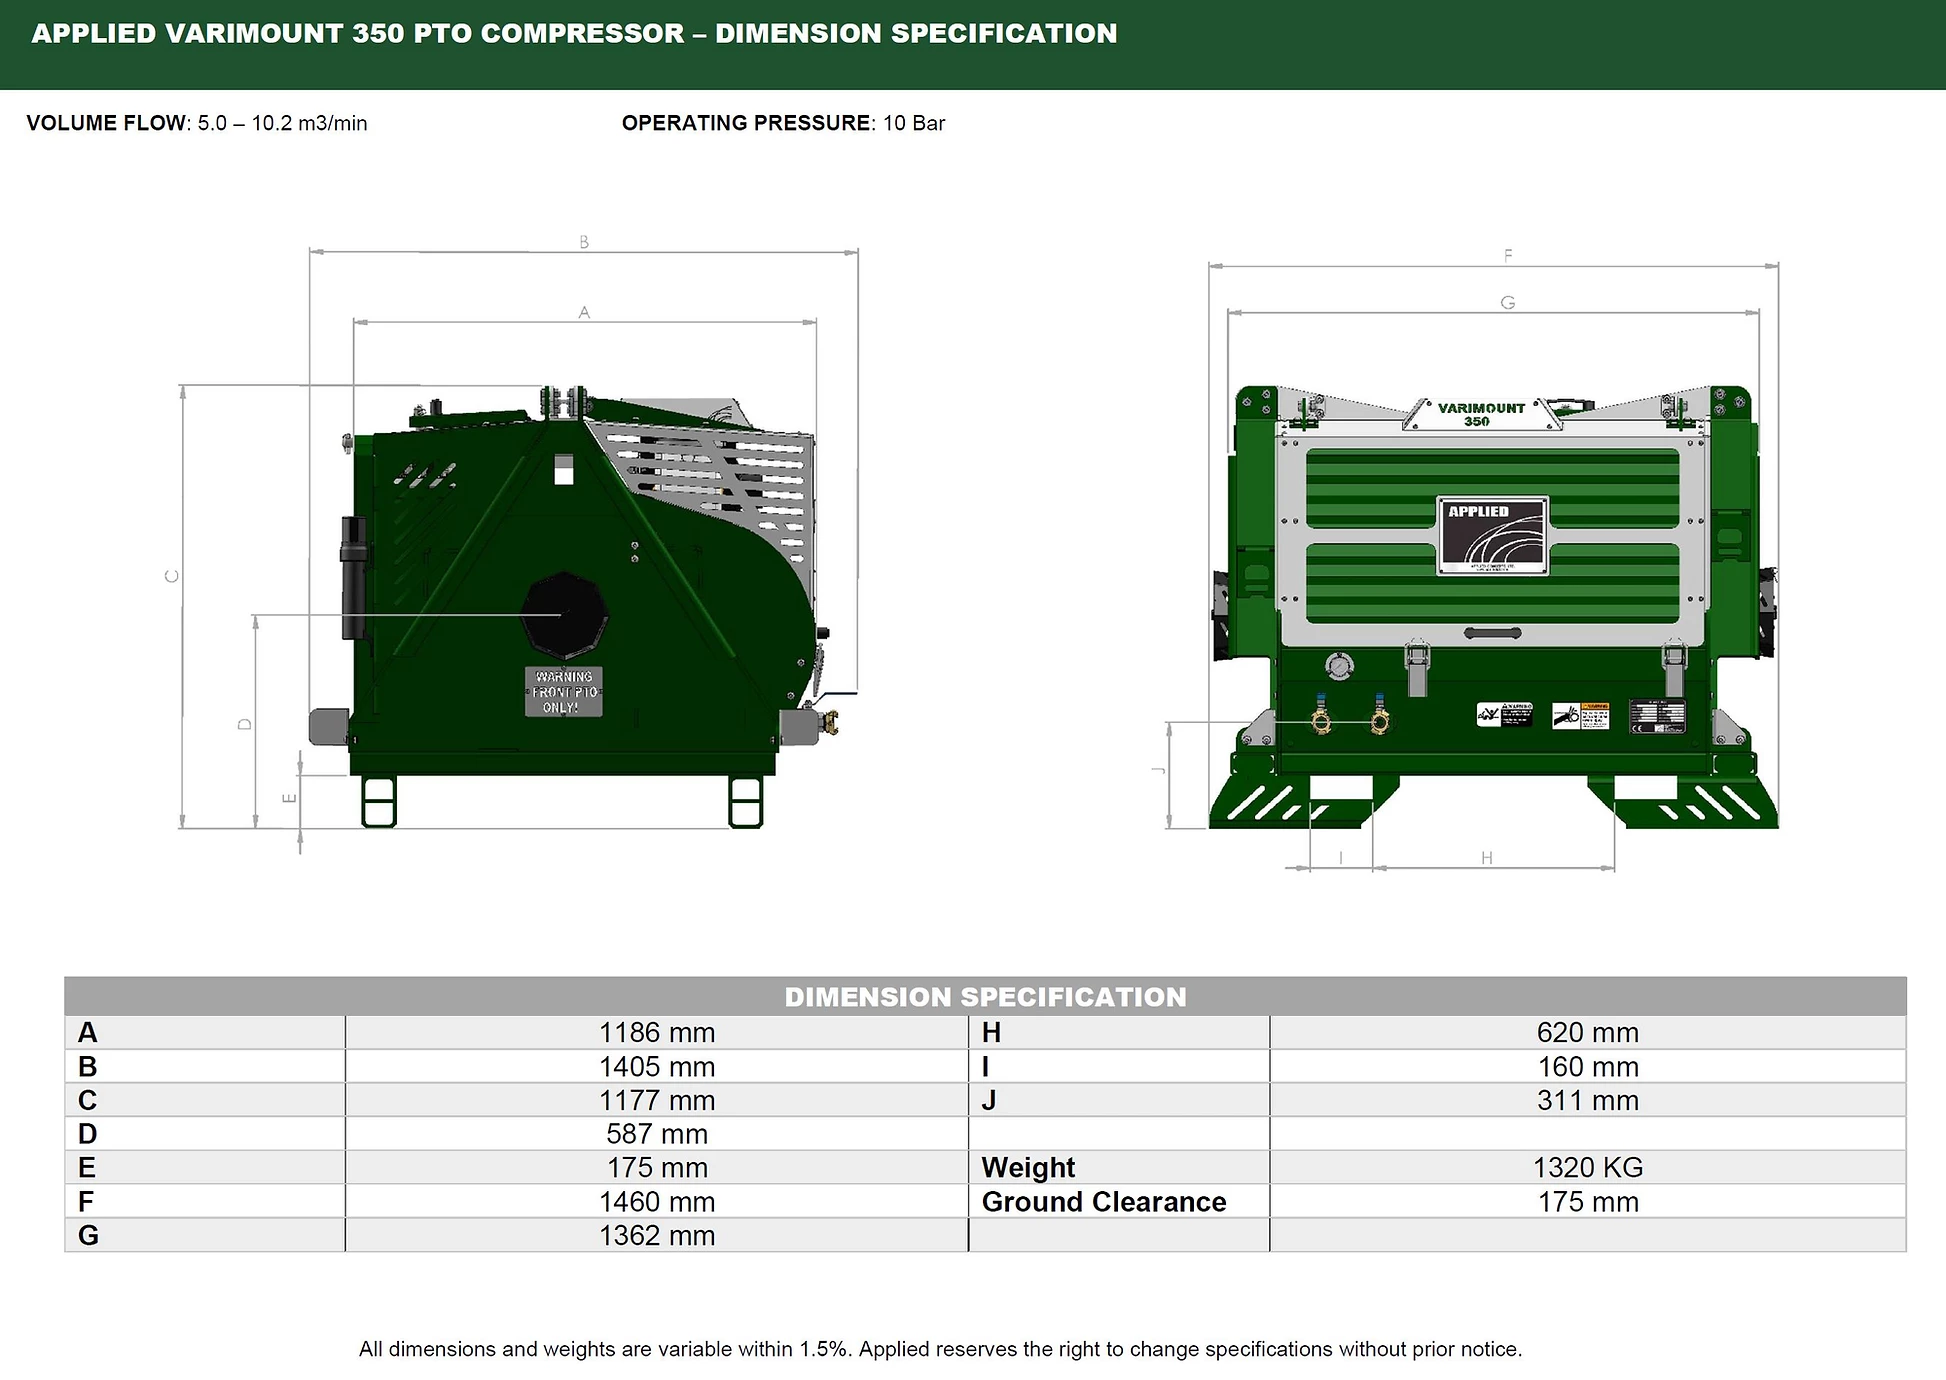 The dimension specifications of the Varimount 350 PTO Compressor